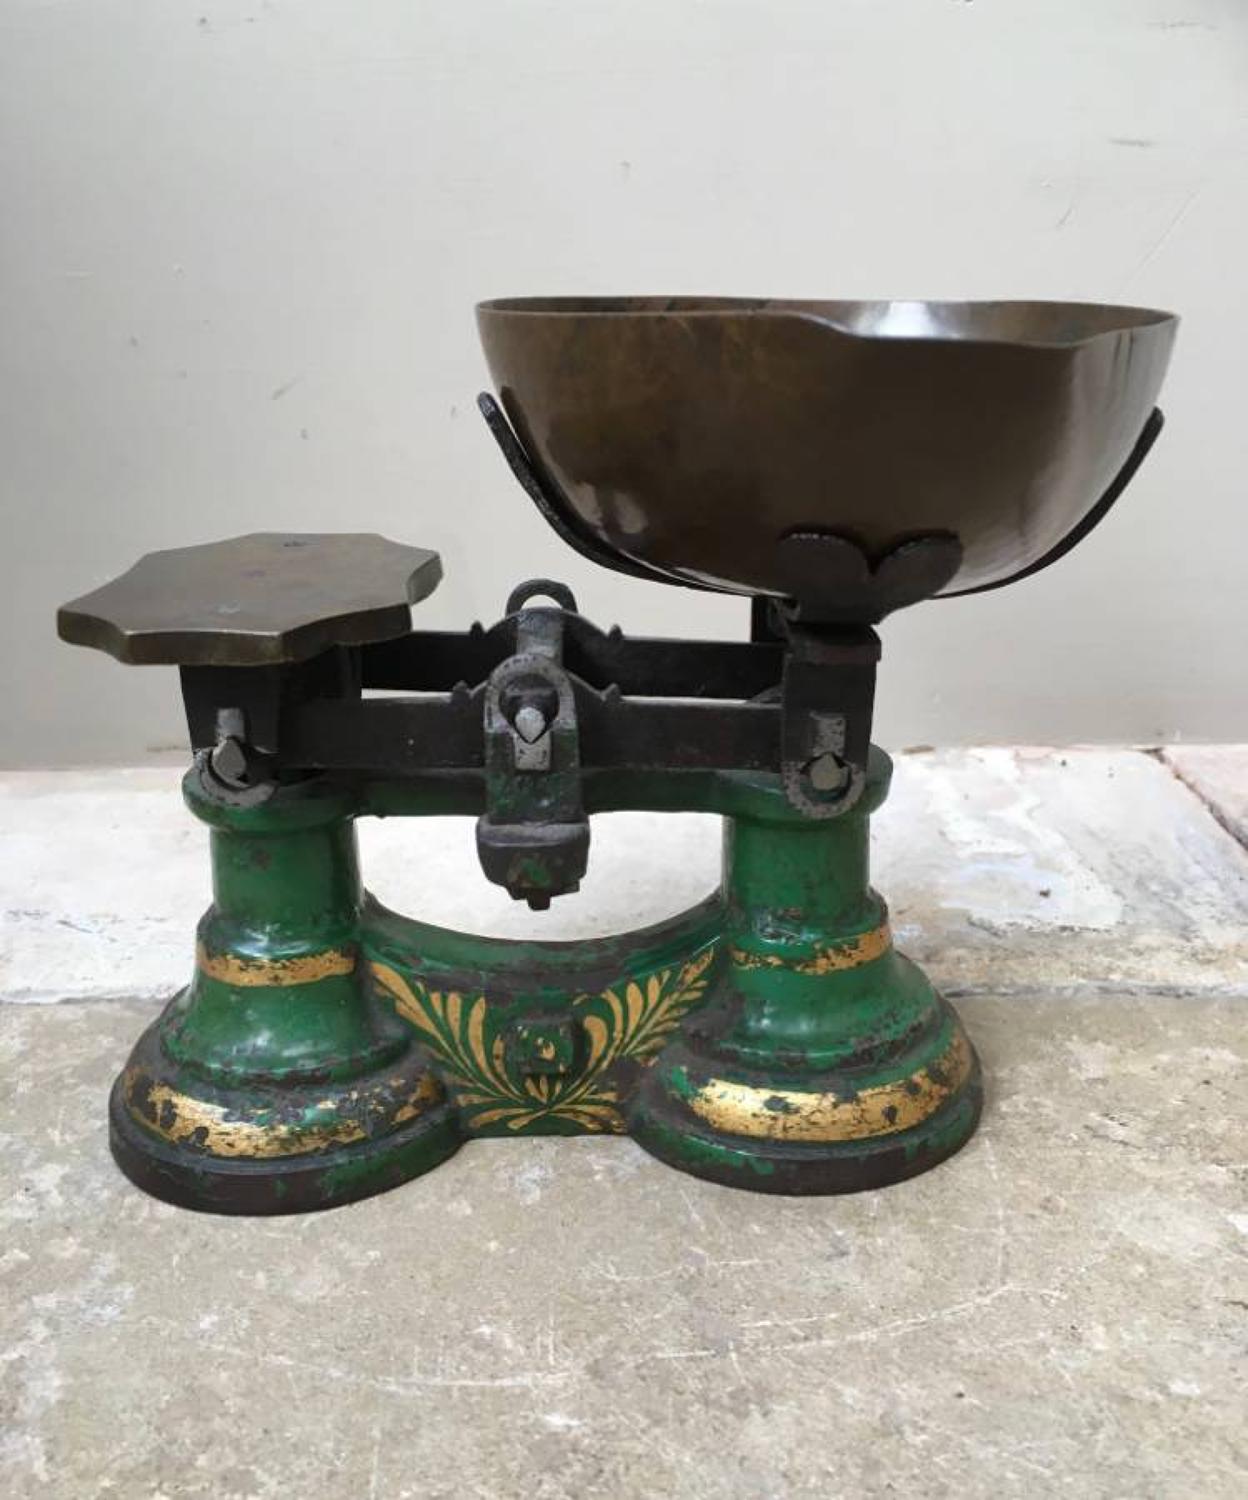 Very Rare Victorian Sweet Shop Scales to Weigh Half Pound